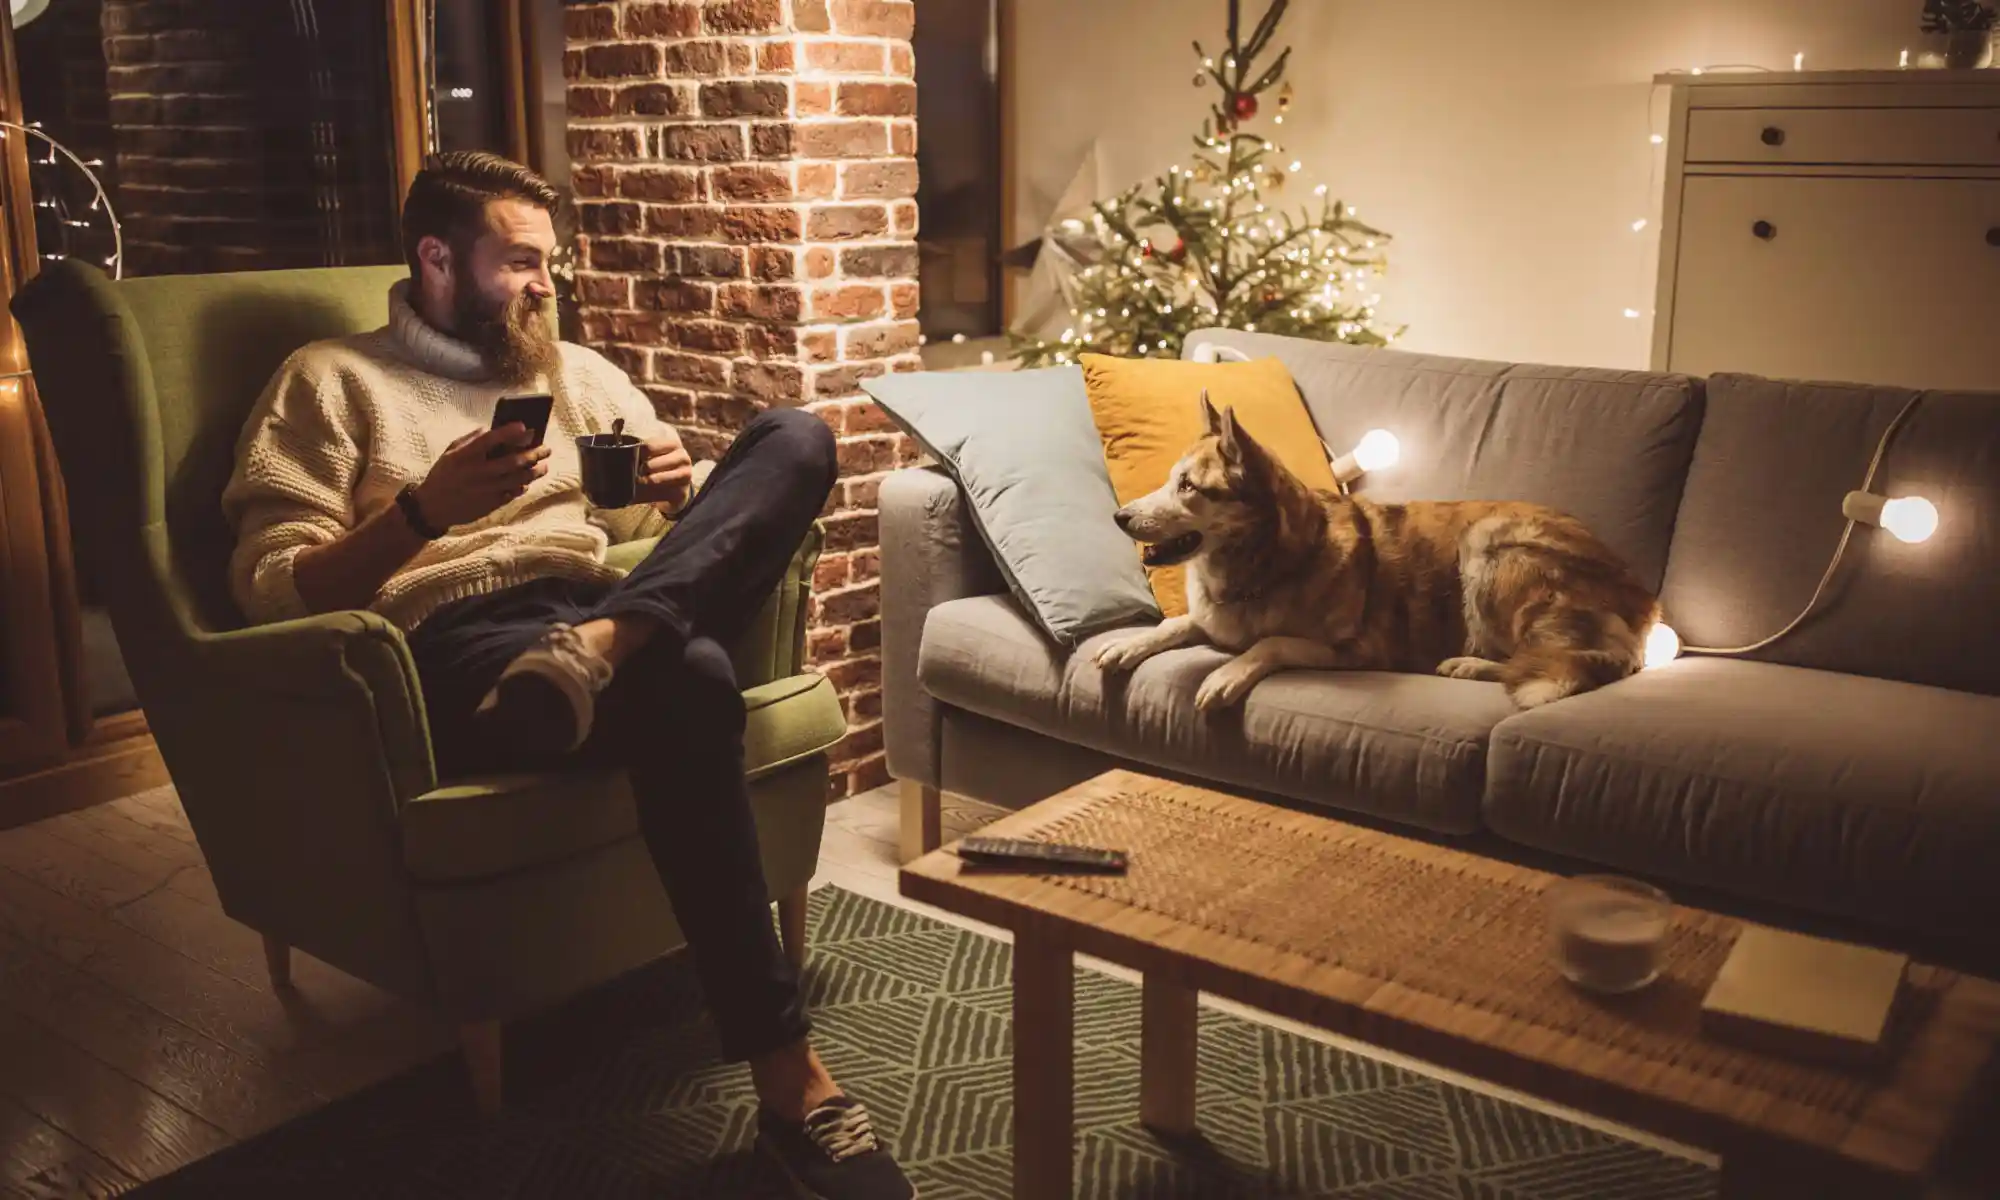 Man on his phone in a dim-lit living room with his dog